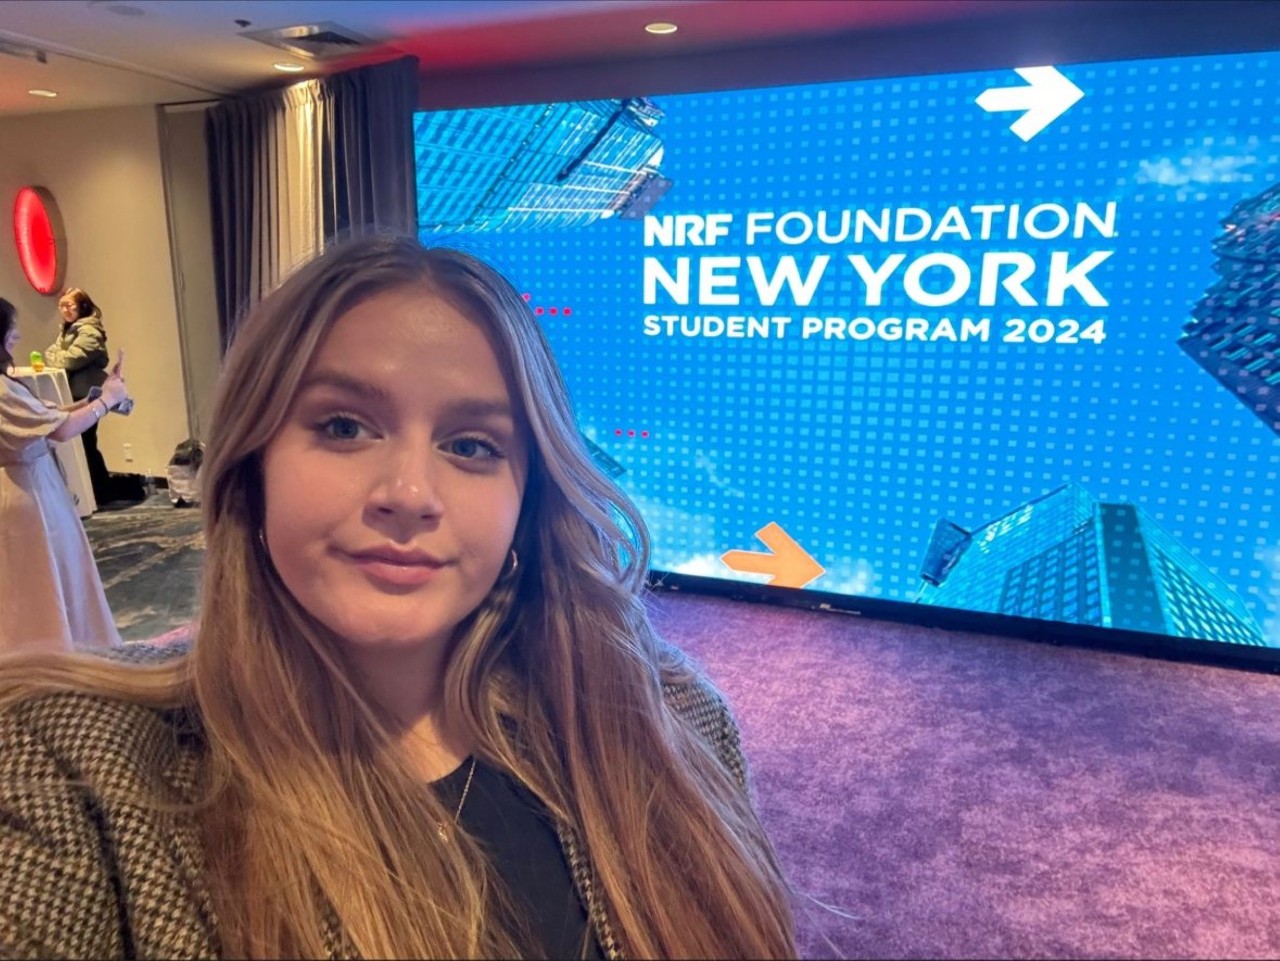 Kaylen Rolsen standing front of sign promoting a conference for  the National Retail Foundation in New York City